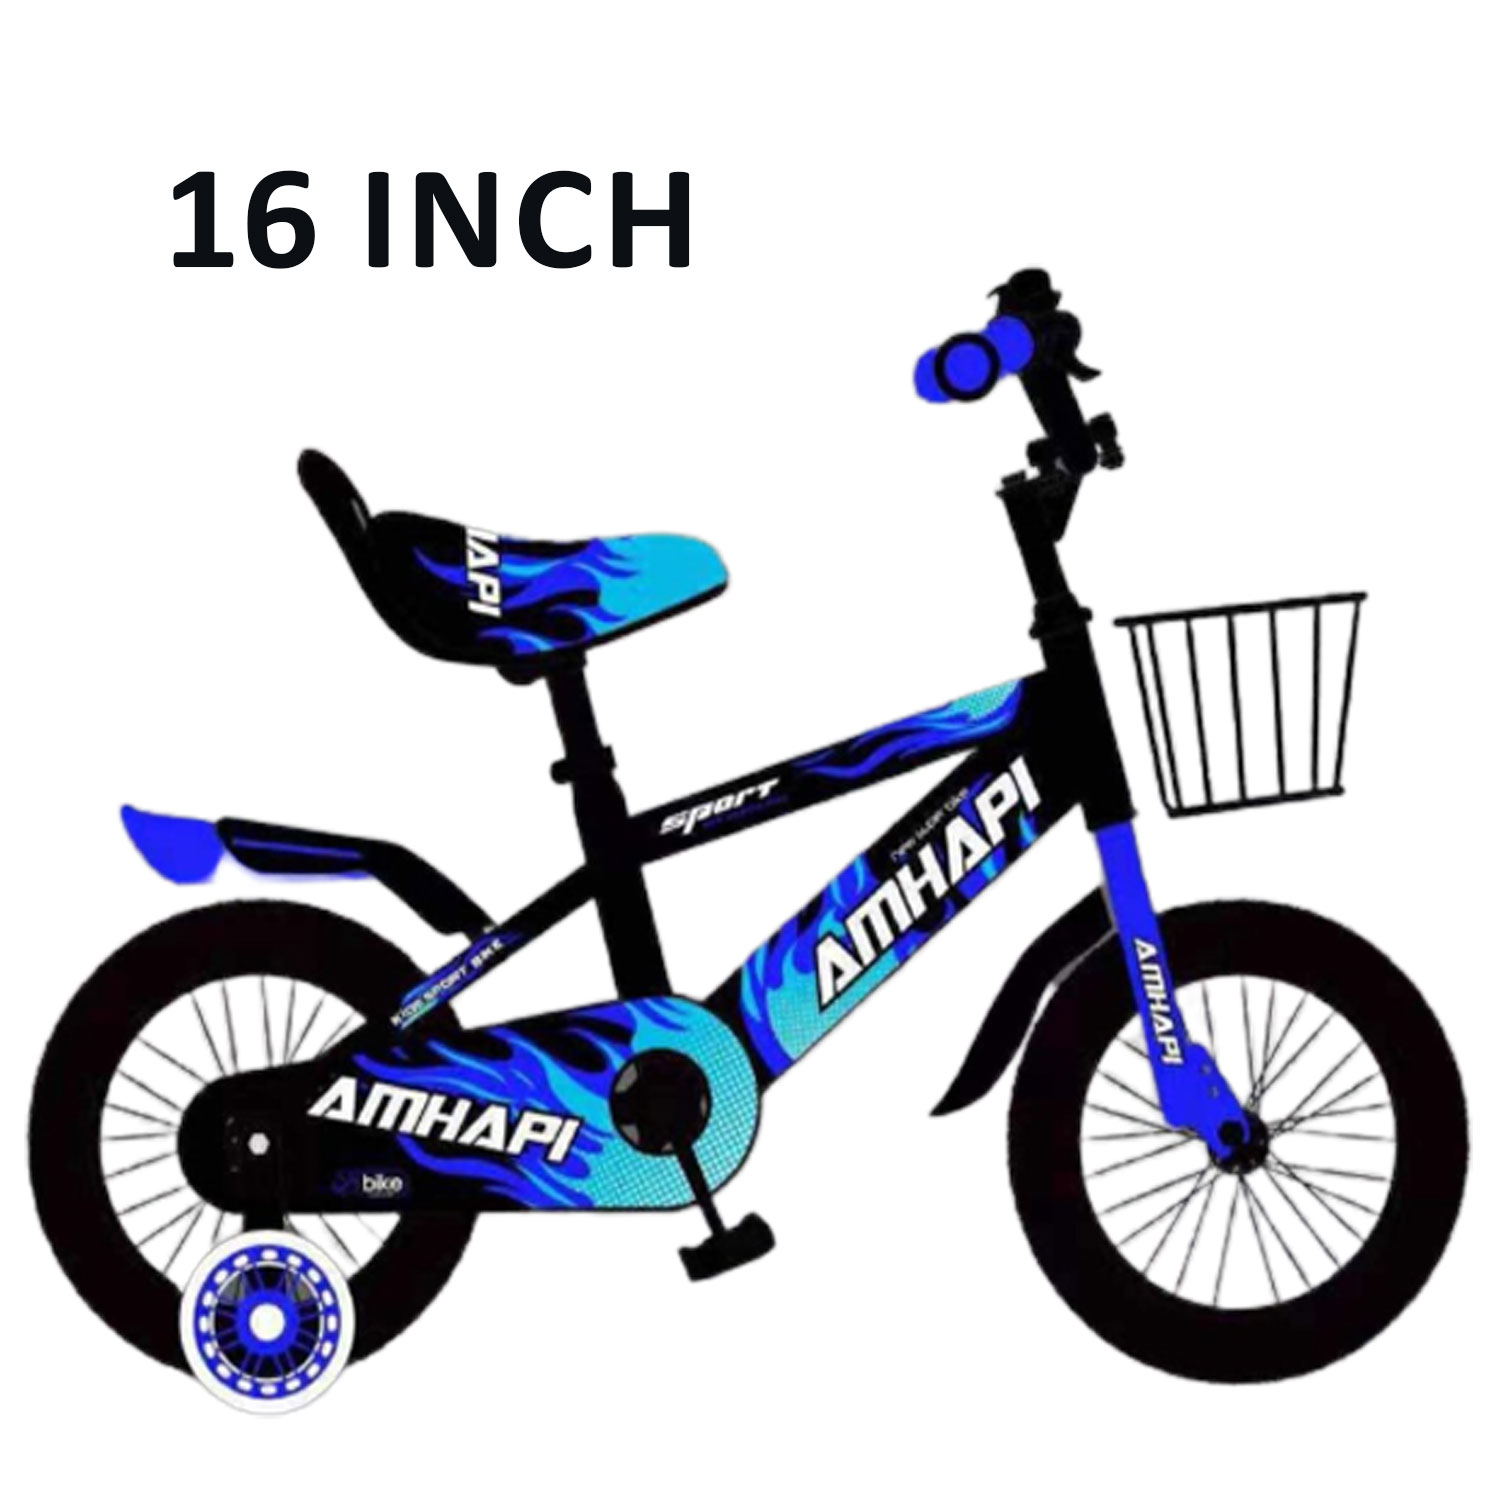 Cycle for Kids | Bike for Boys and Girls | Black-Blue MD-433 (16" inch)